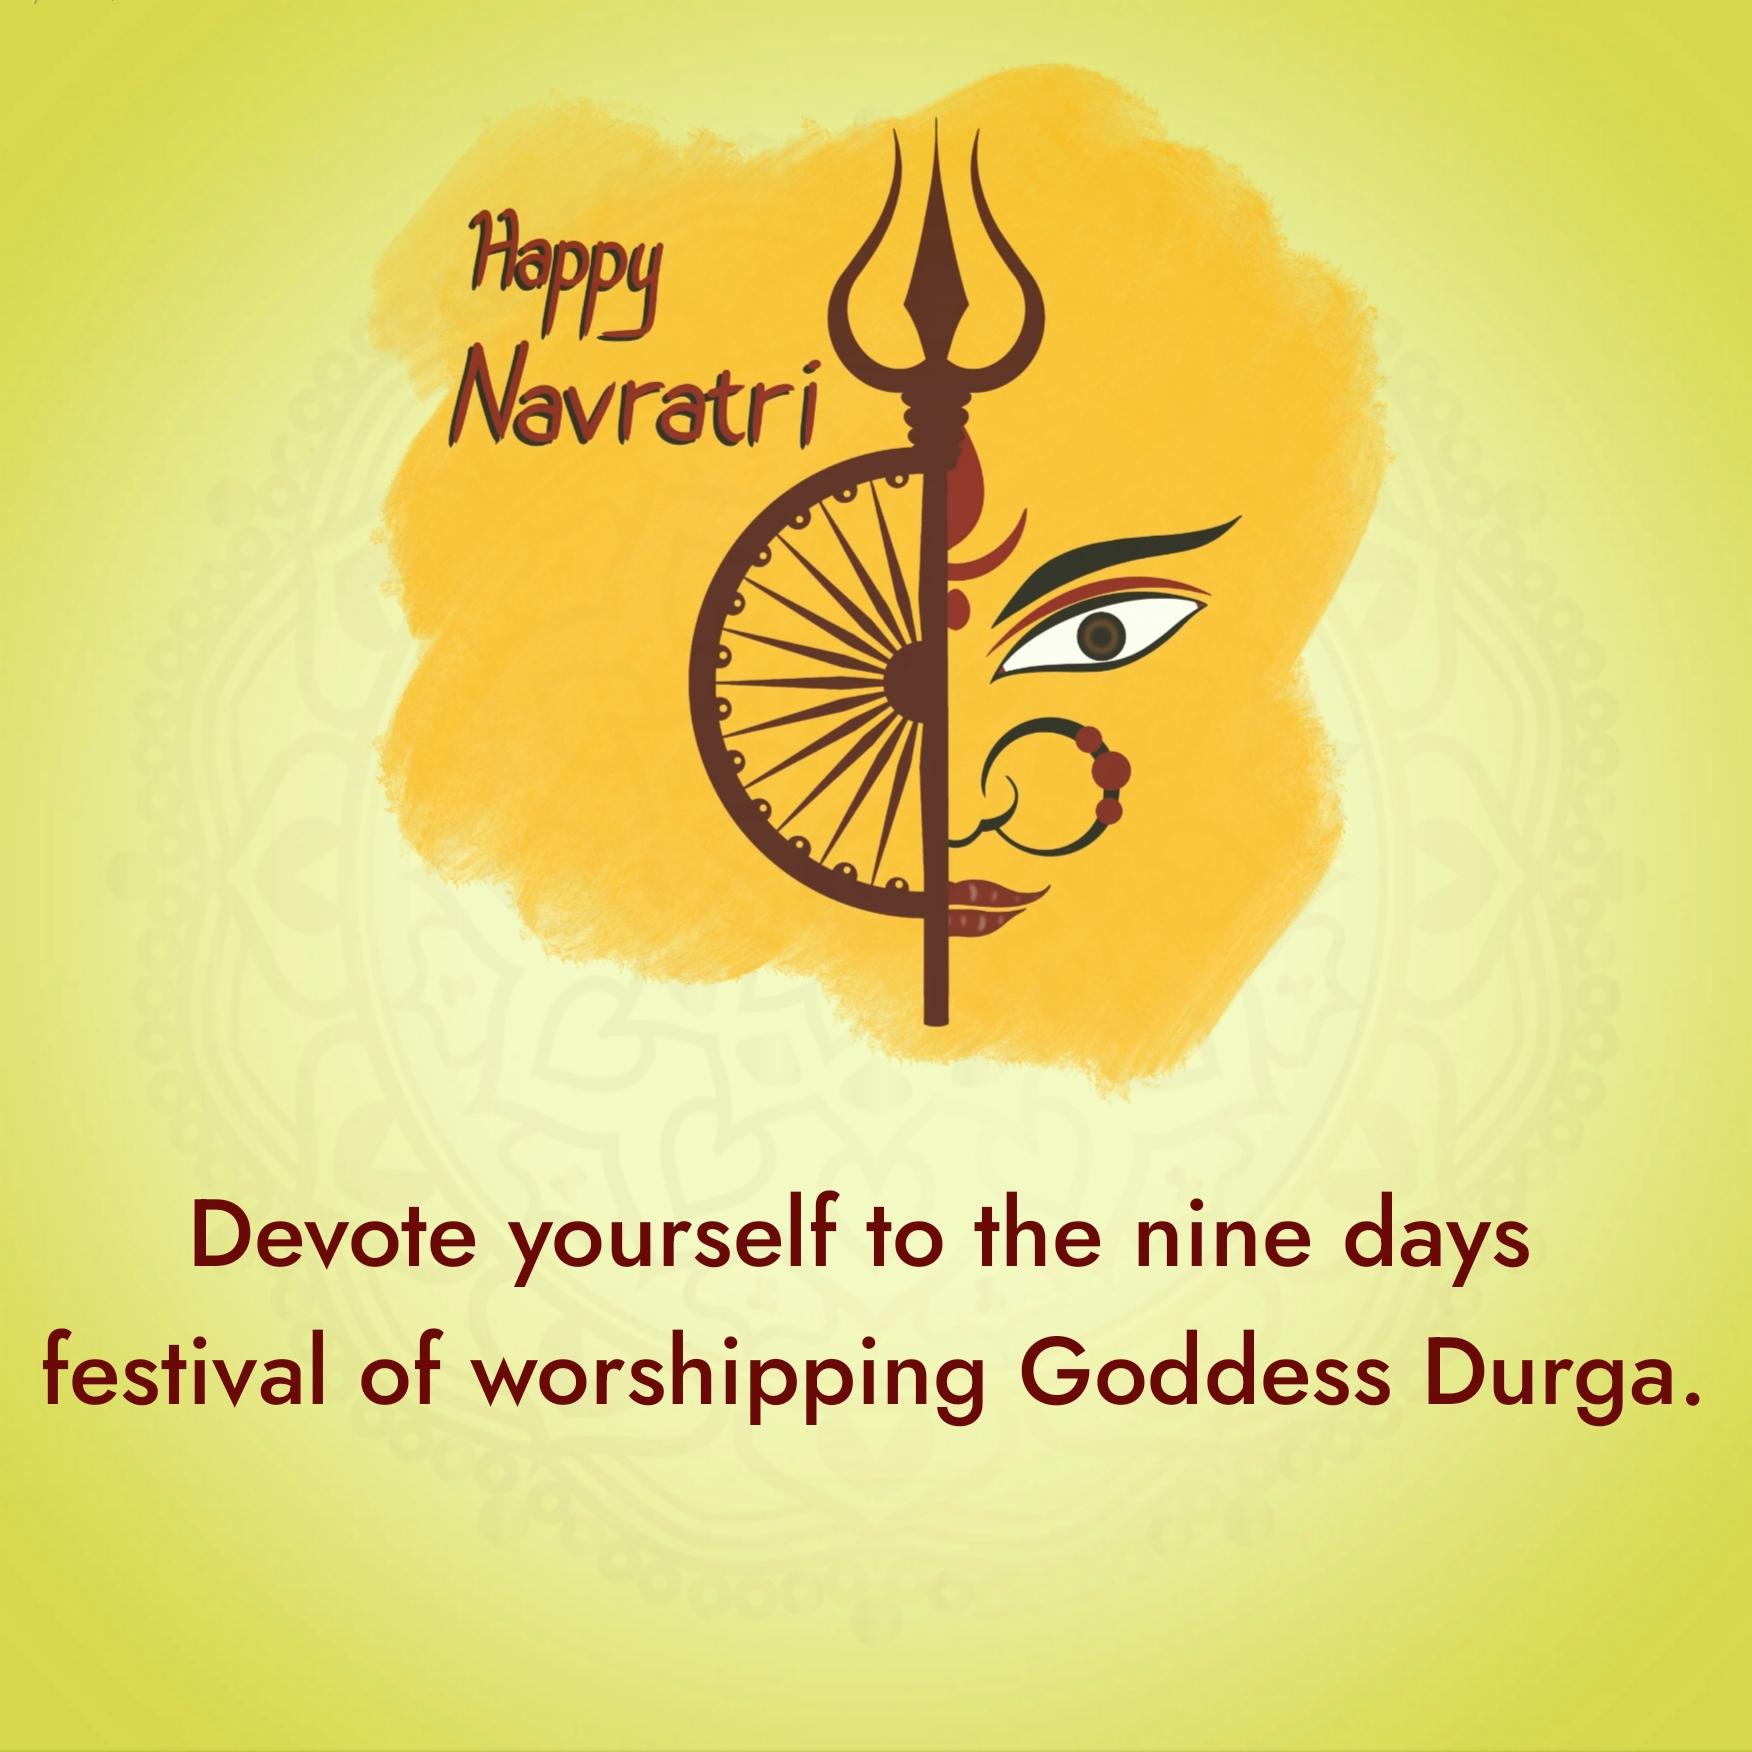 Devote yourself to the nine days festival of worshipping